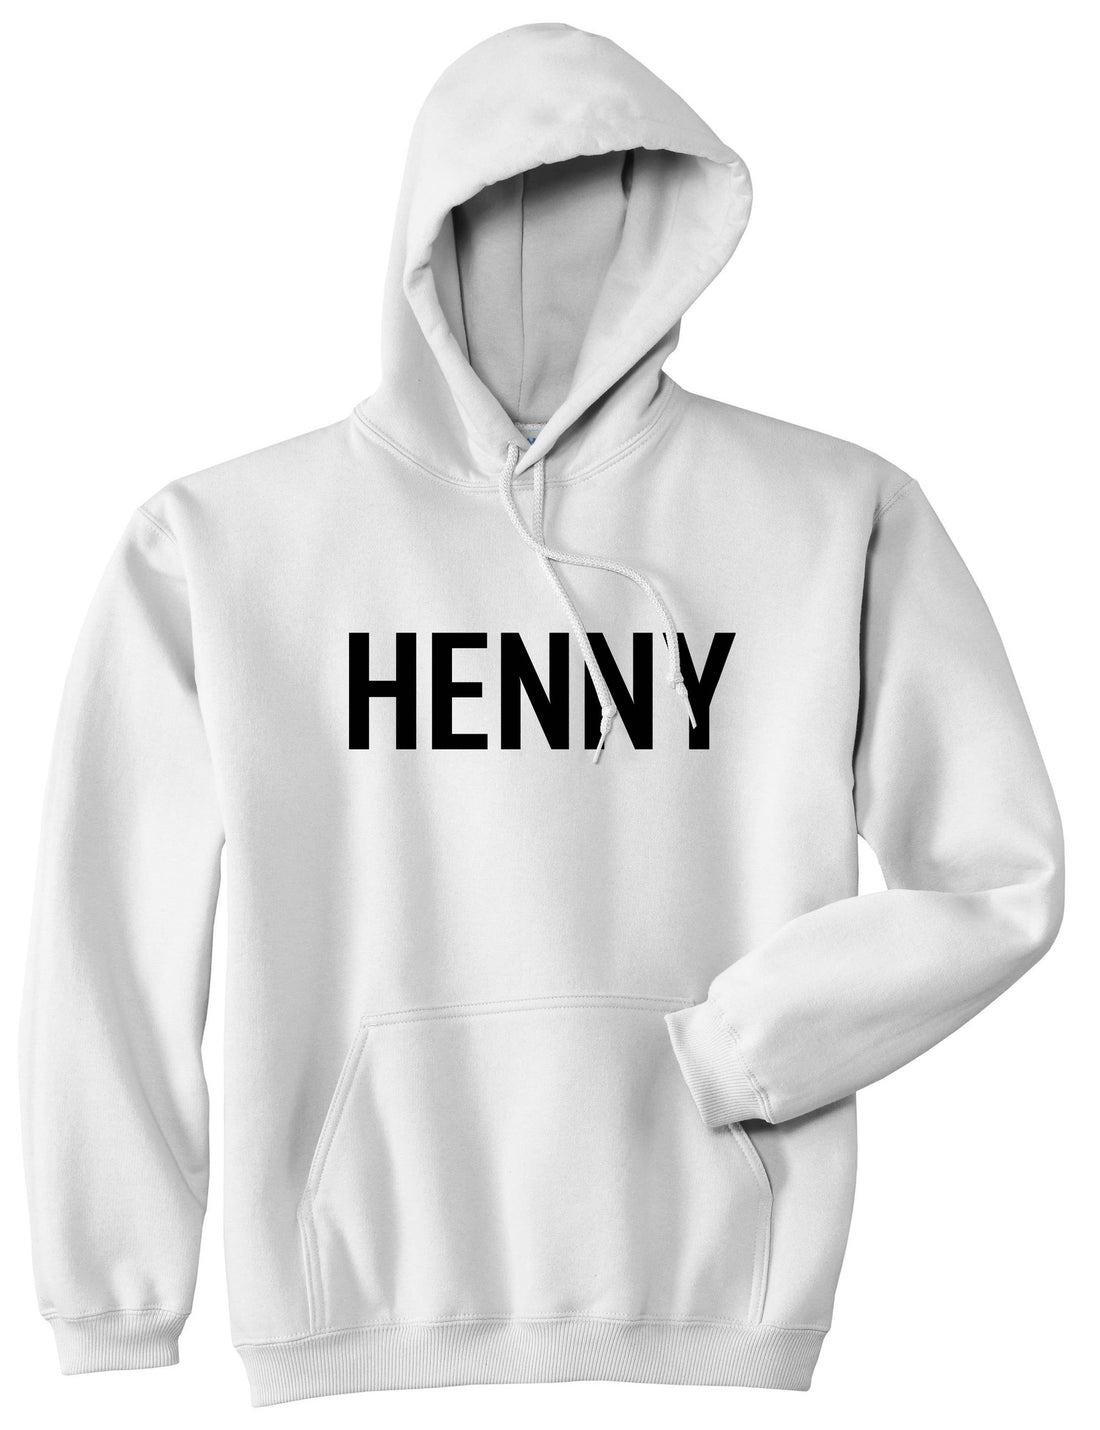 Henny Pullover Hoodie Hoody by Kings Of NY